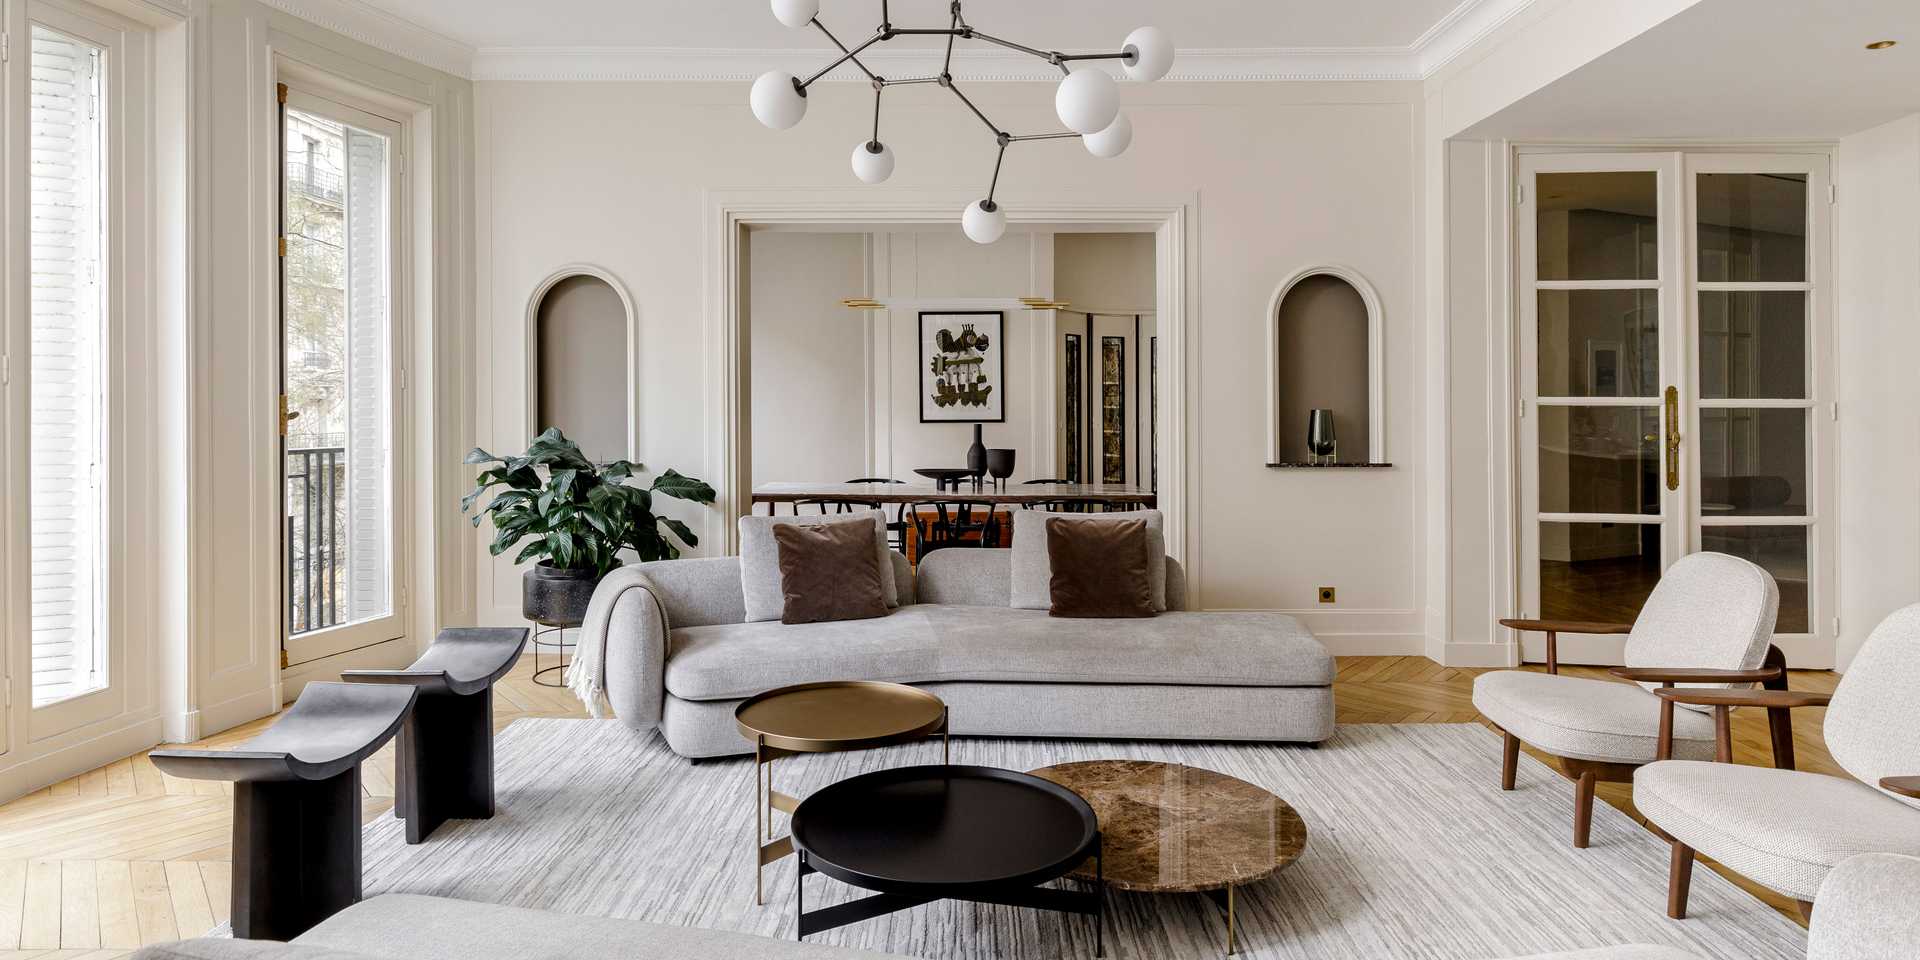 Furnishing of a Haussmann-style apartment by an interior designer in Paris